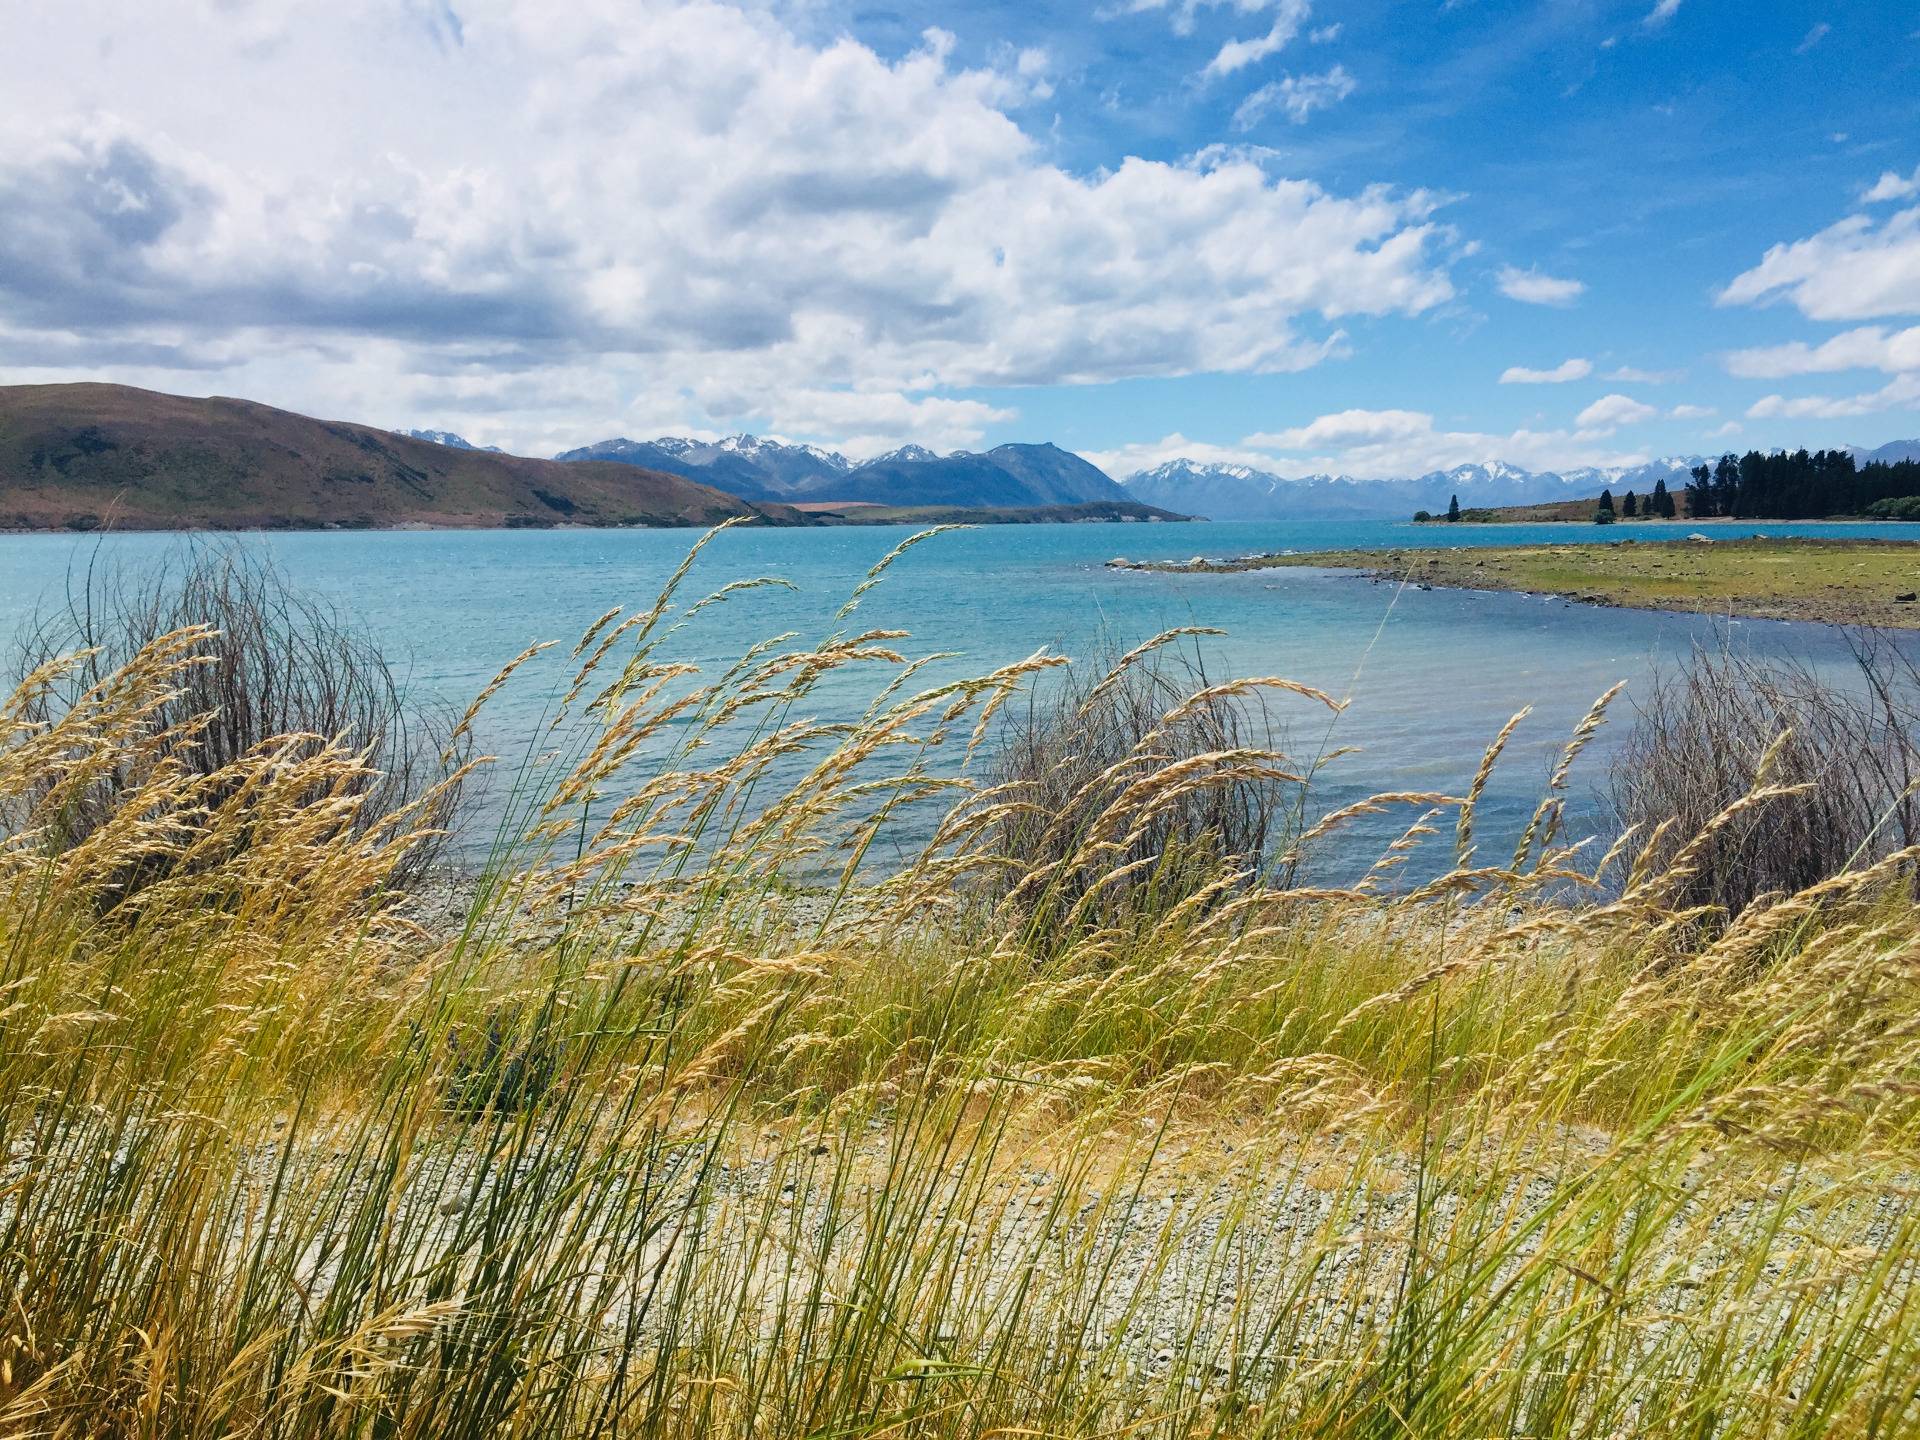 Some tips to visit the greatest spots at Lake Tekapo 